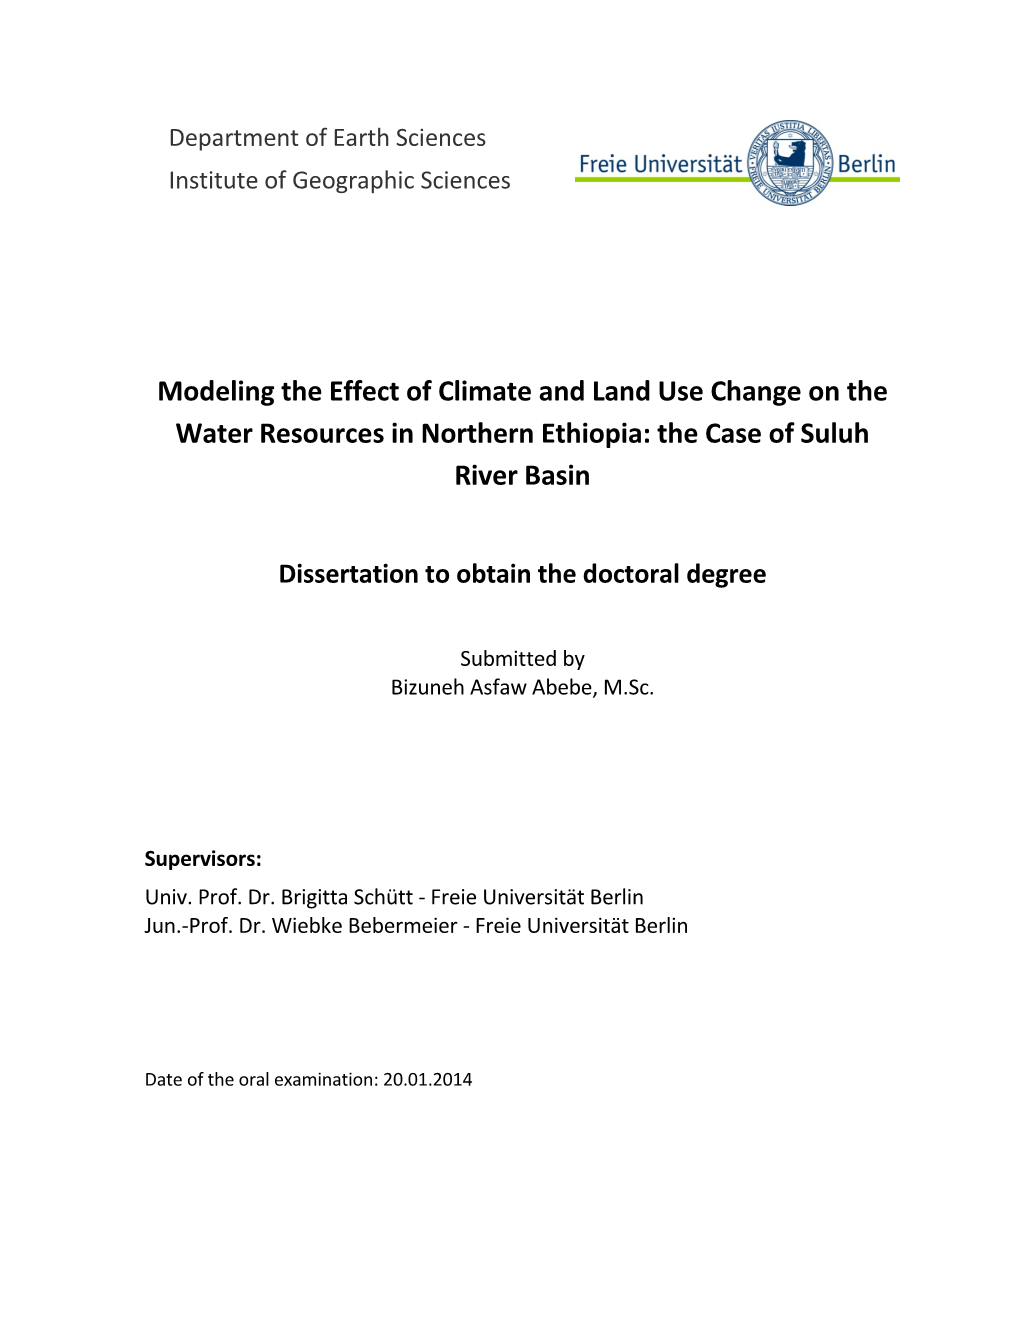 Modeling the Effect of Climate and Land Use Change on the Water Resources in Northern Ethiopia: the Case of Suluh River Basin